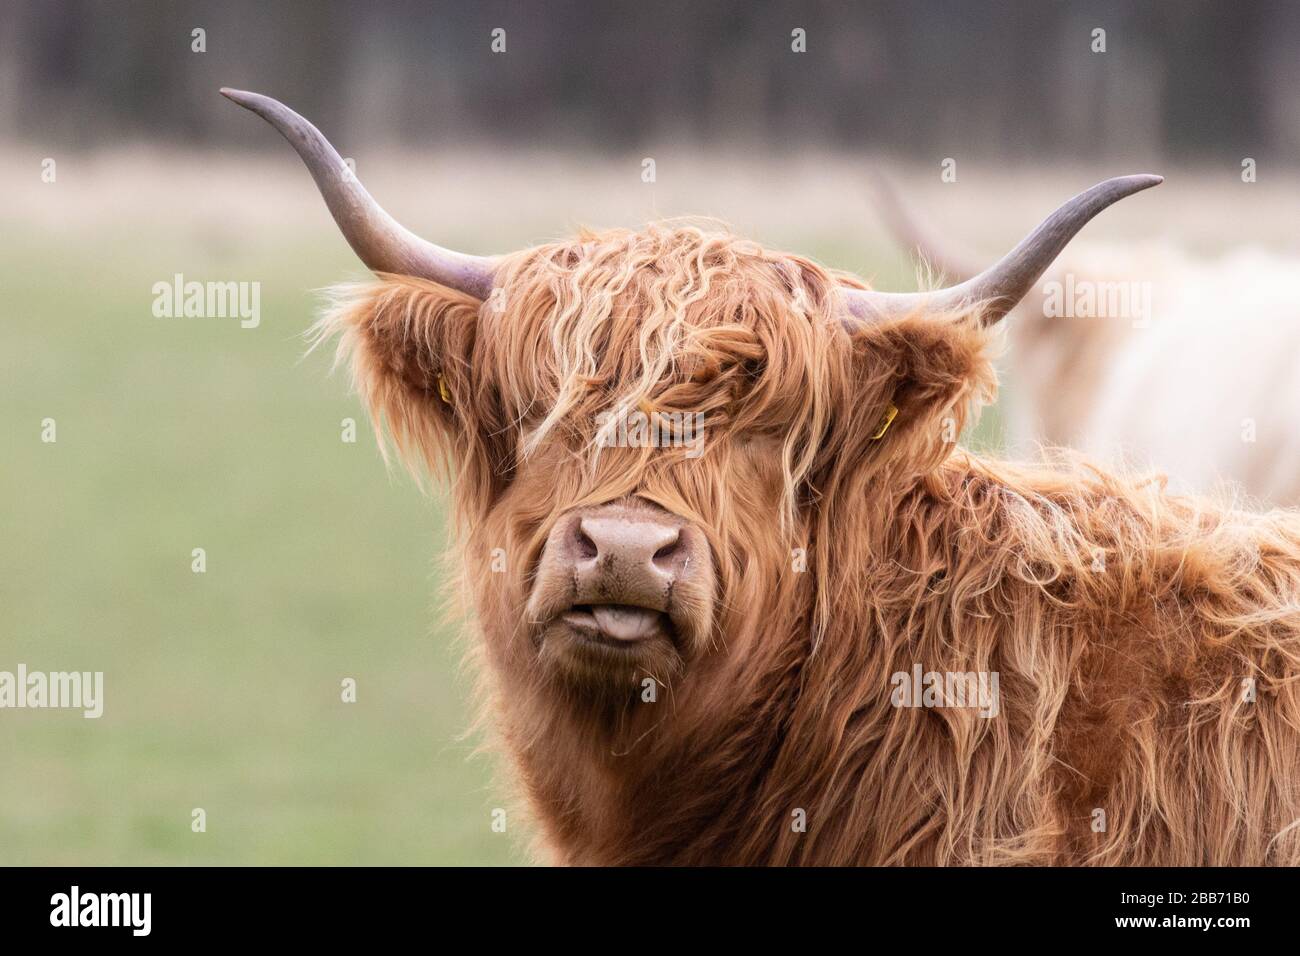 A fluffy highland cow with large horns Stock Photo